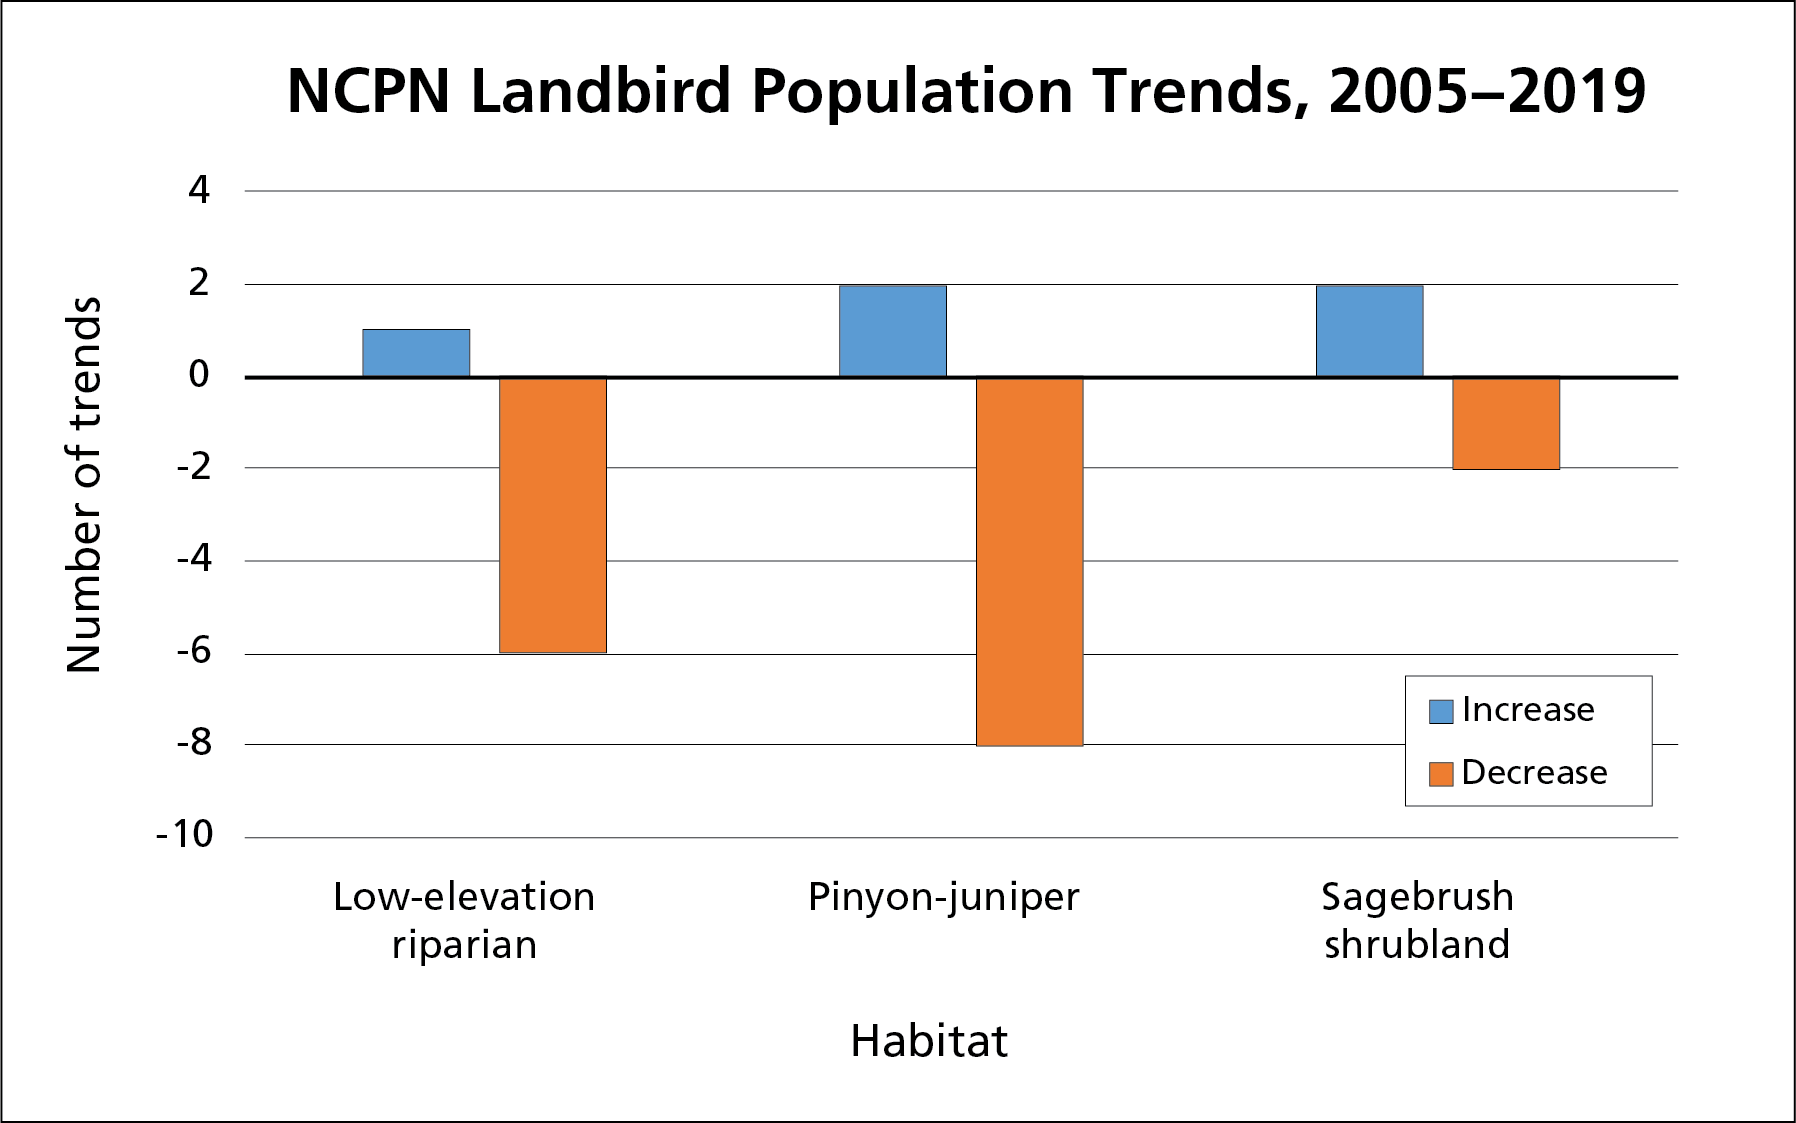 Chart showing number of increasing and declining trends in three habitats, as shown in table.